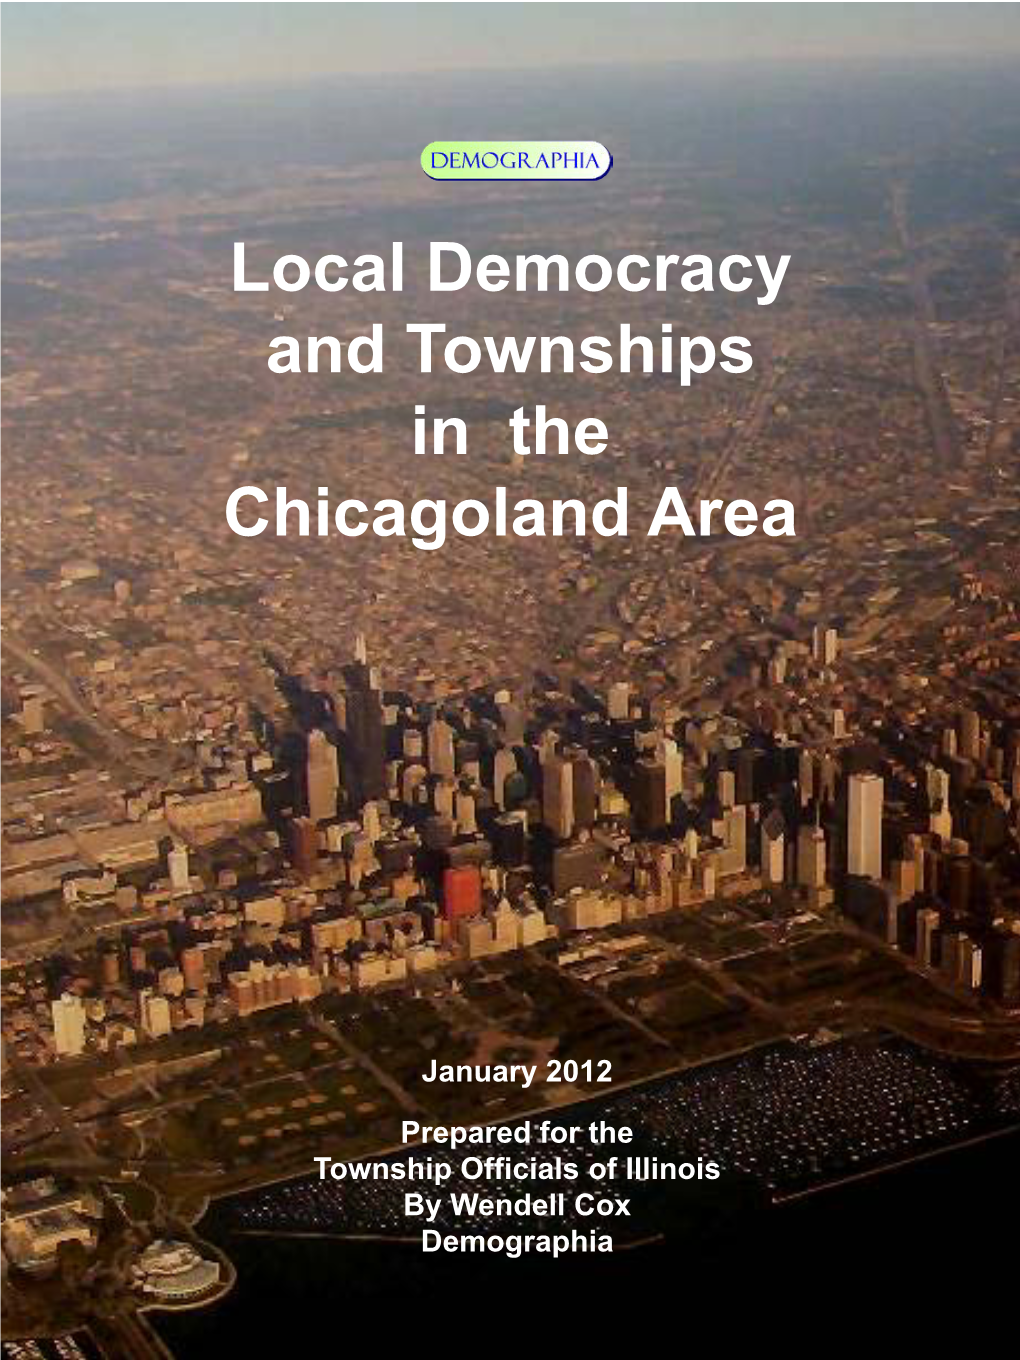 Local Democracy and Townships in the Chicagoland Area